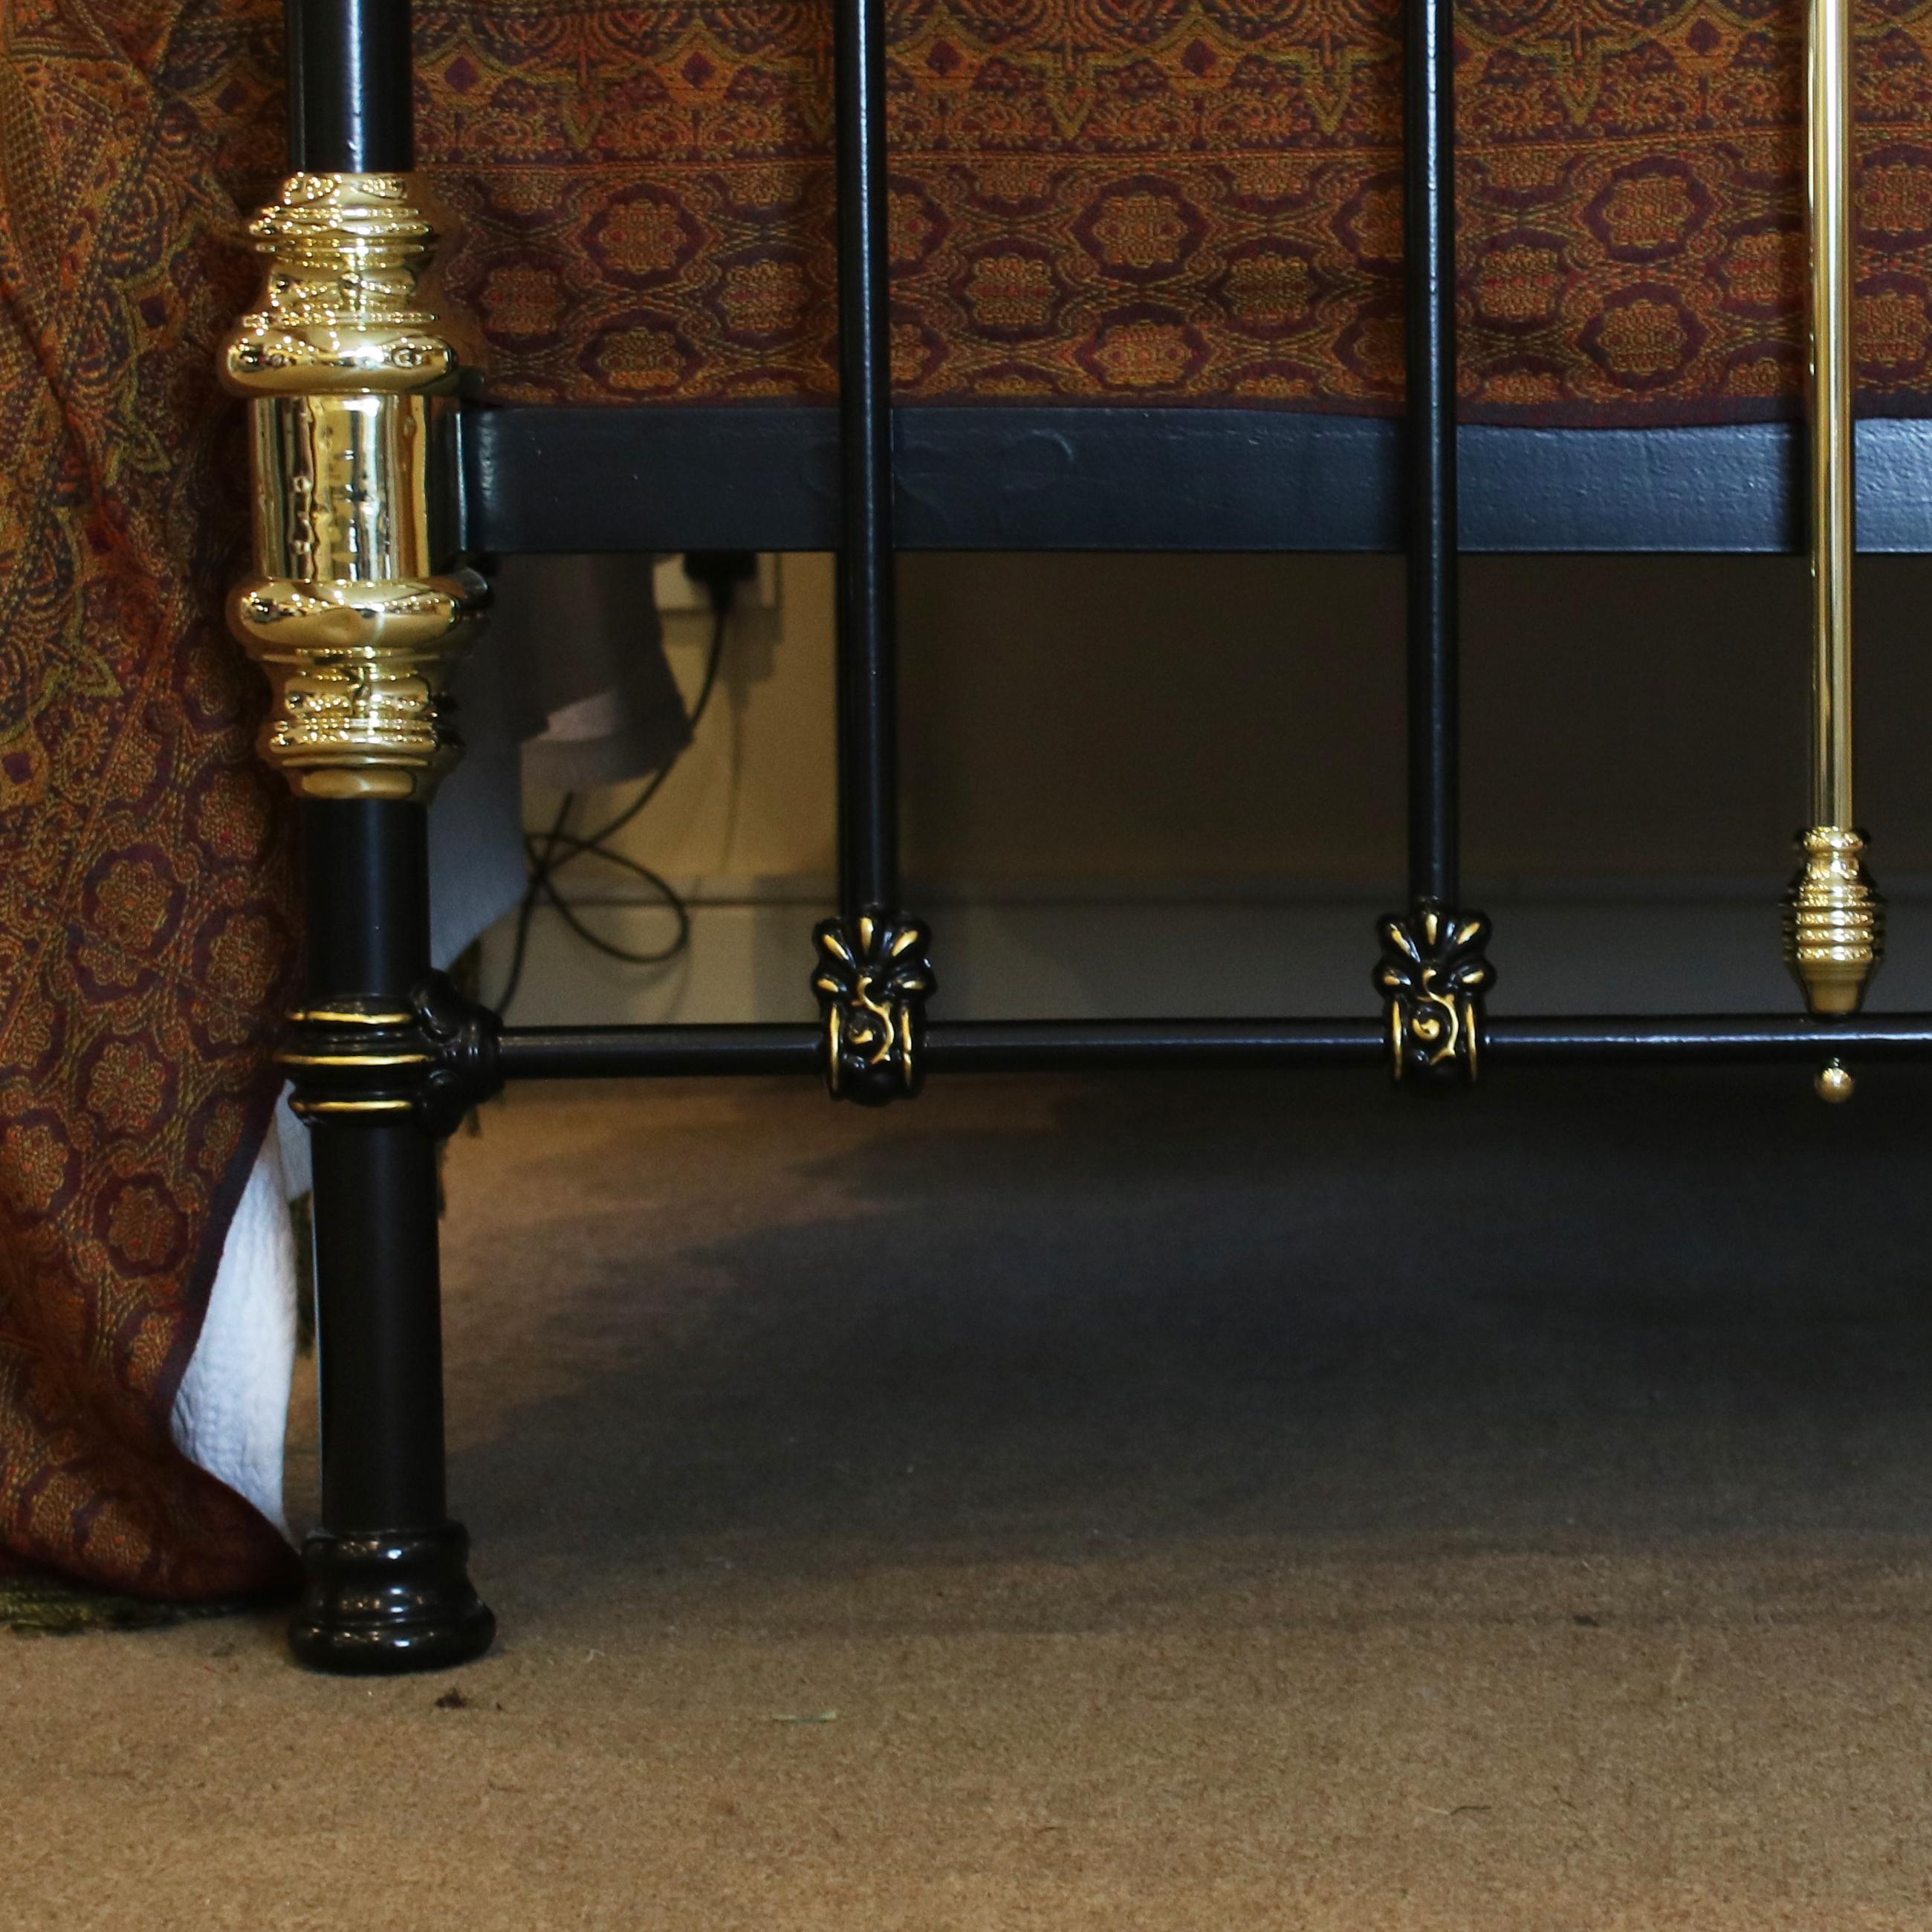 19th Century Decorative Brass and Iron Bed in Black, MK164